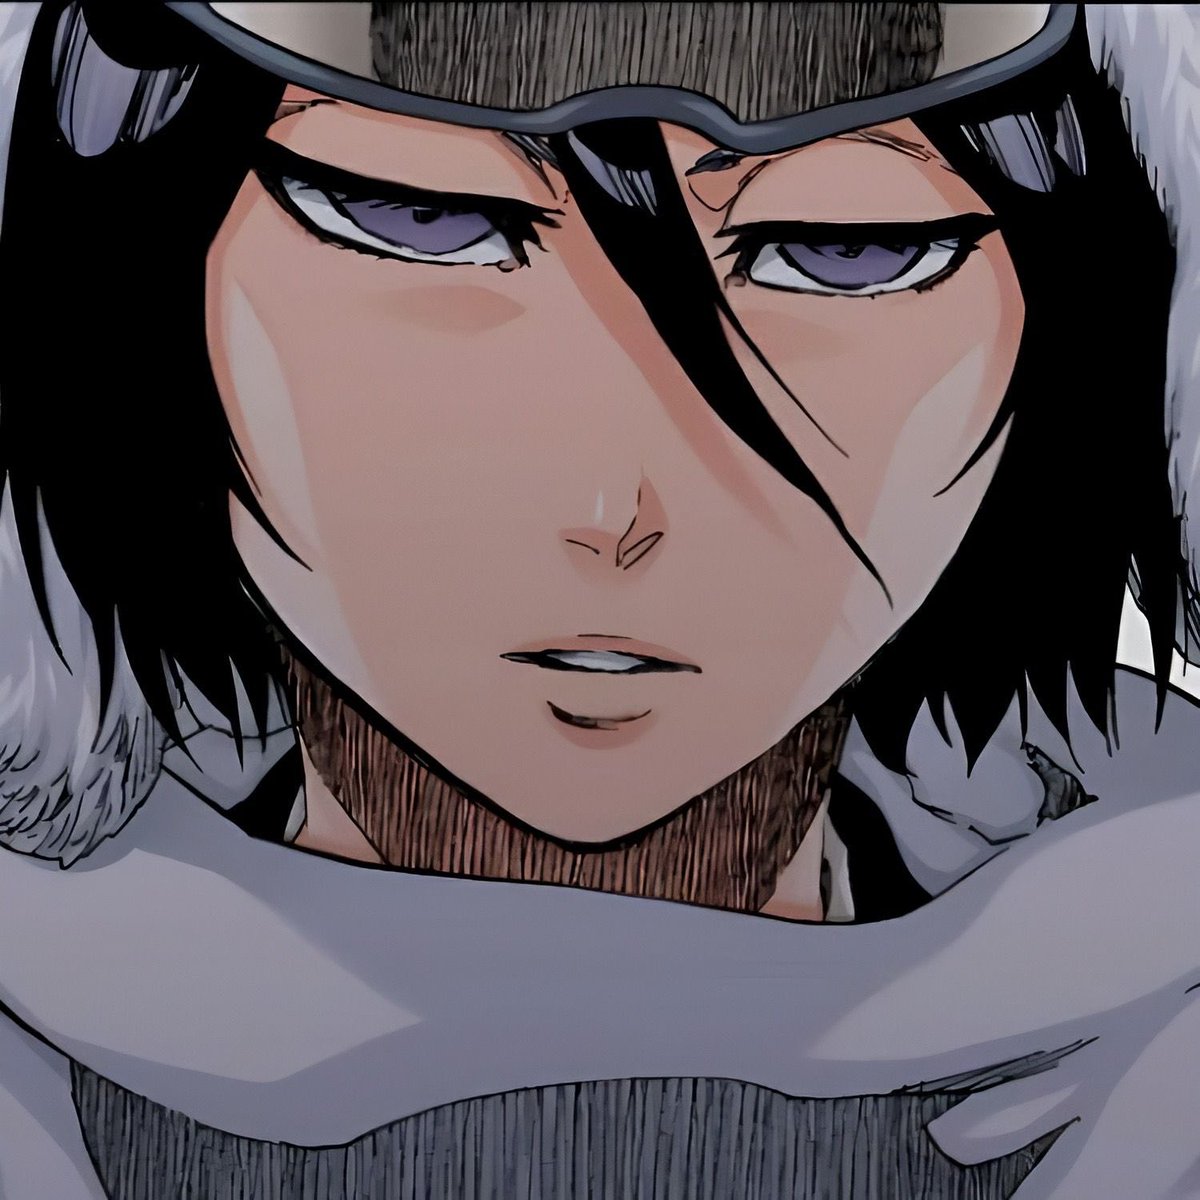 missing my ice queen rukia ❄️